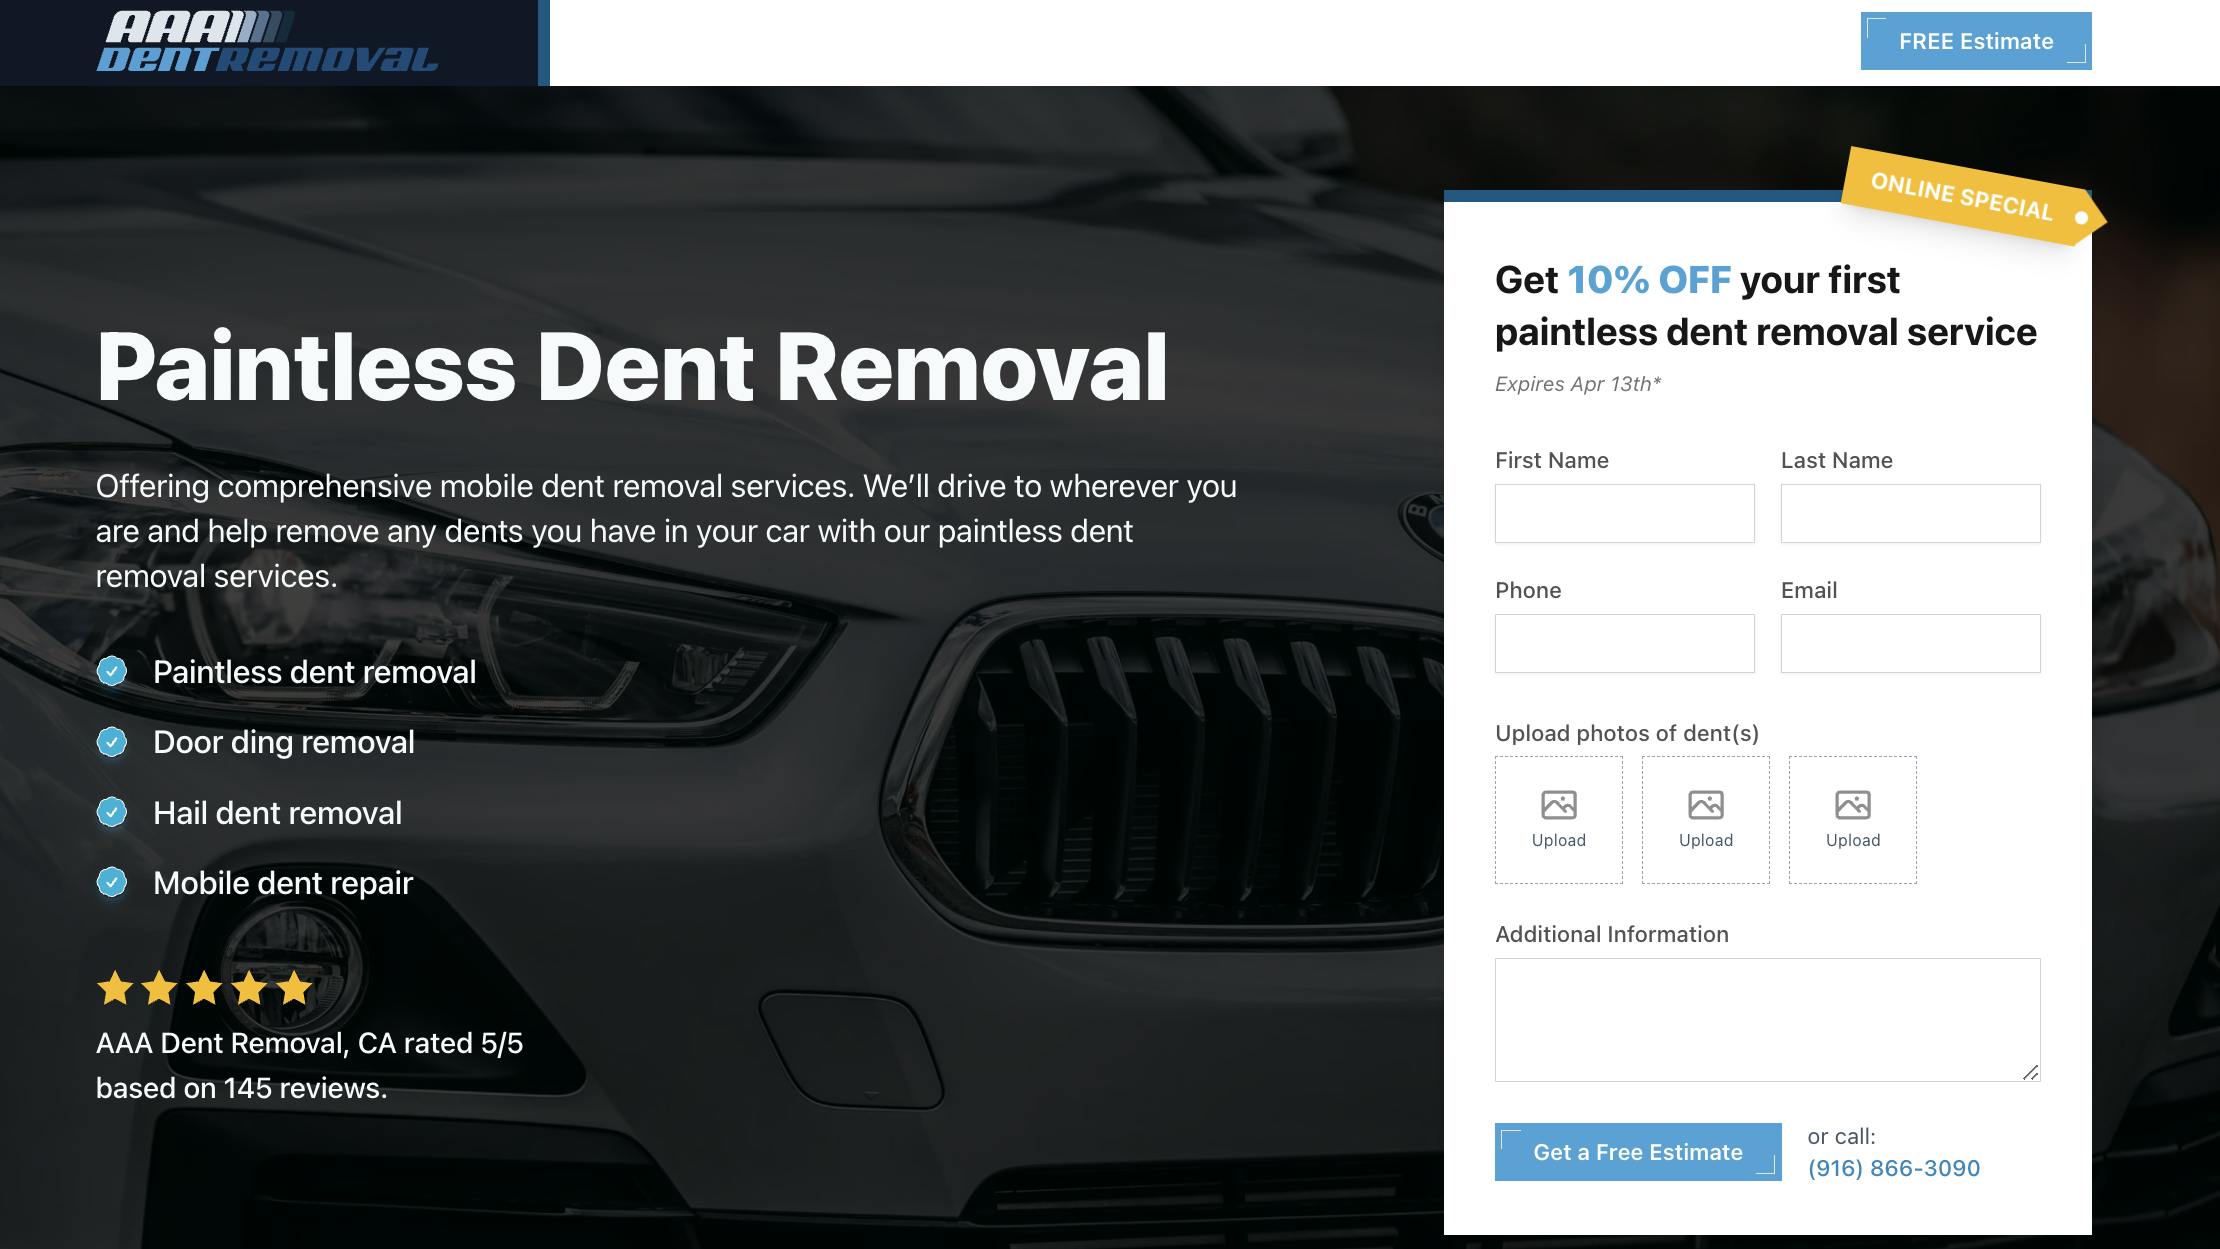 Promotional banner for AAA Dent Removal's paintless dent repair service, with a monochrome image of a car highlighting the service areas: paintless dent removal, door ding, hail damage, and mobile repair. Rated 5/5 based on 145 reviews, it emphasizes quality service and customer satisfaction. An adjacent form offers a 10% discount for new customers, with fields for contact information and photo uploads, inviting immediate engagement.